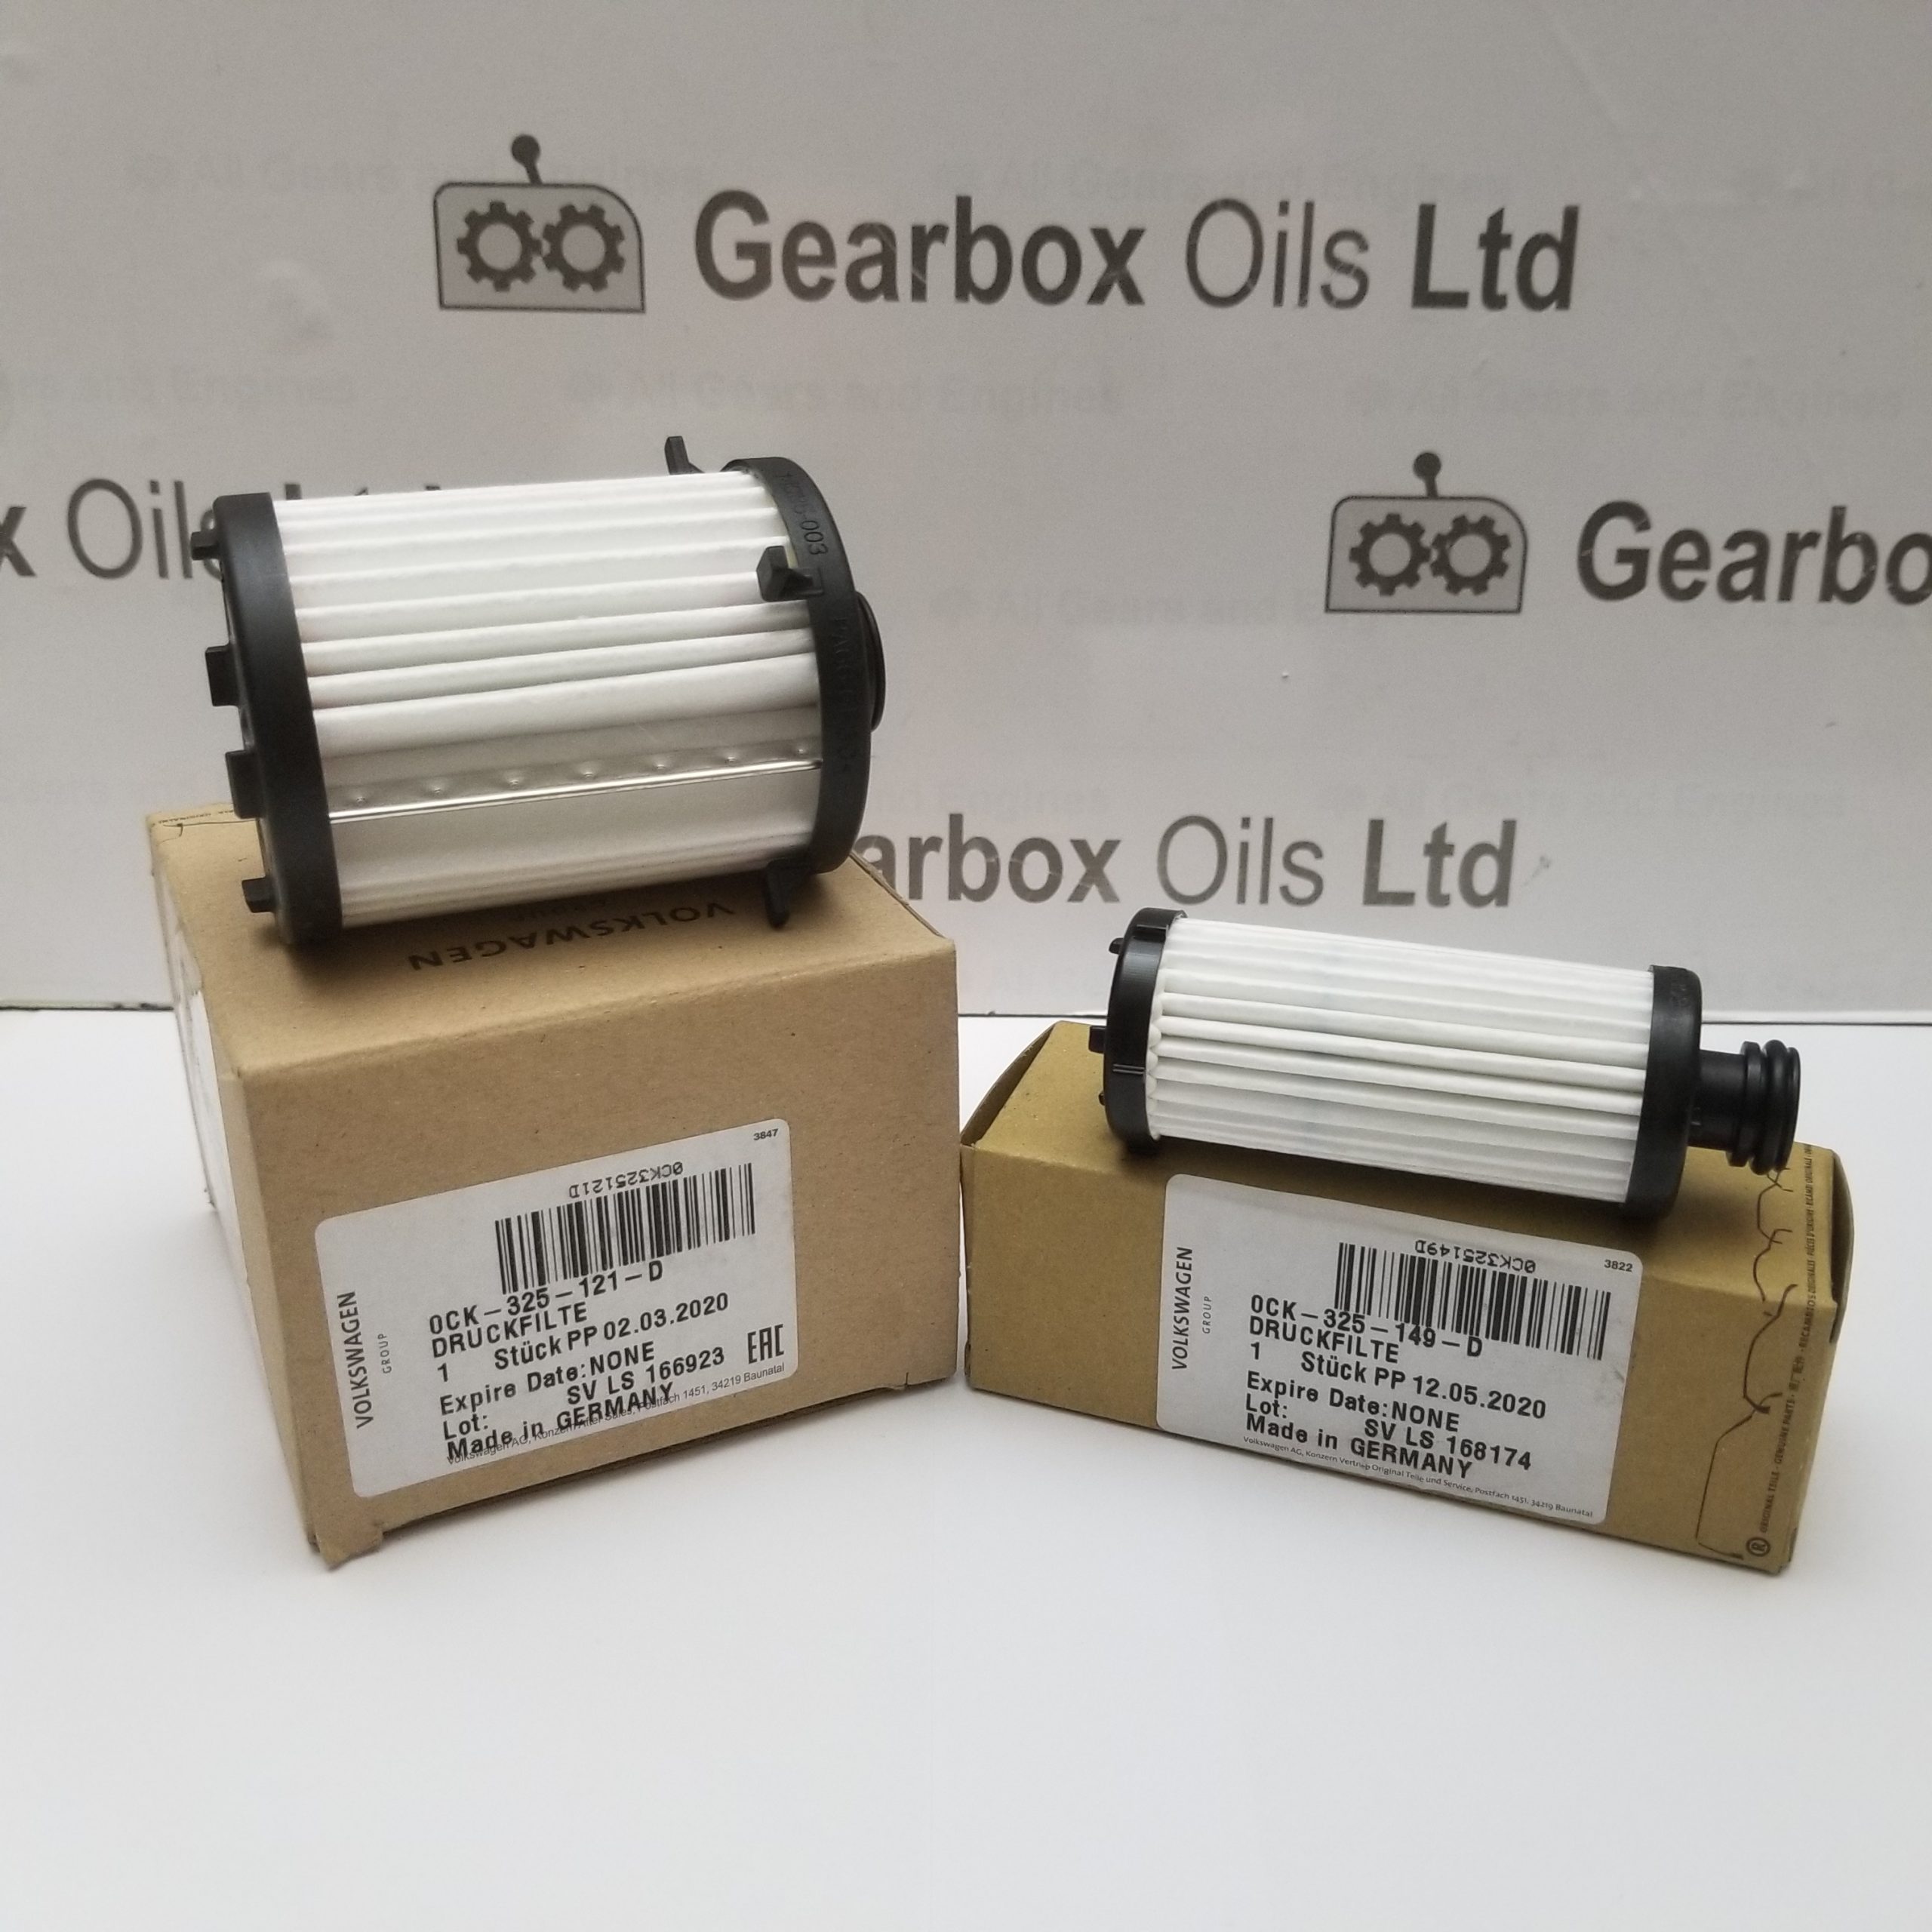 Genuine 7 Speed Audi VW 0CK Automatic Transmission Filters – GearboxOils